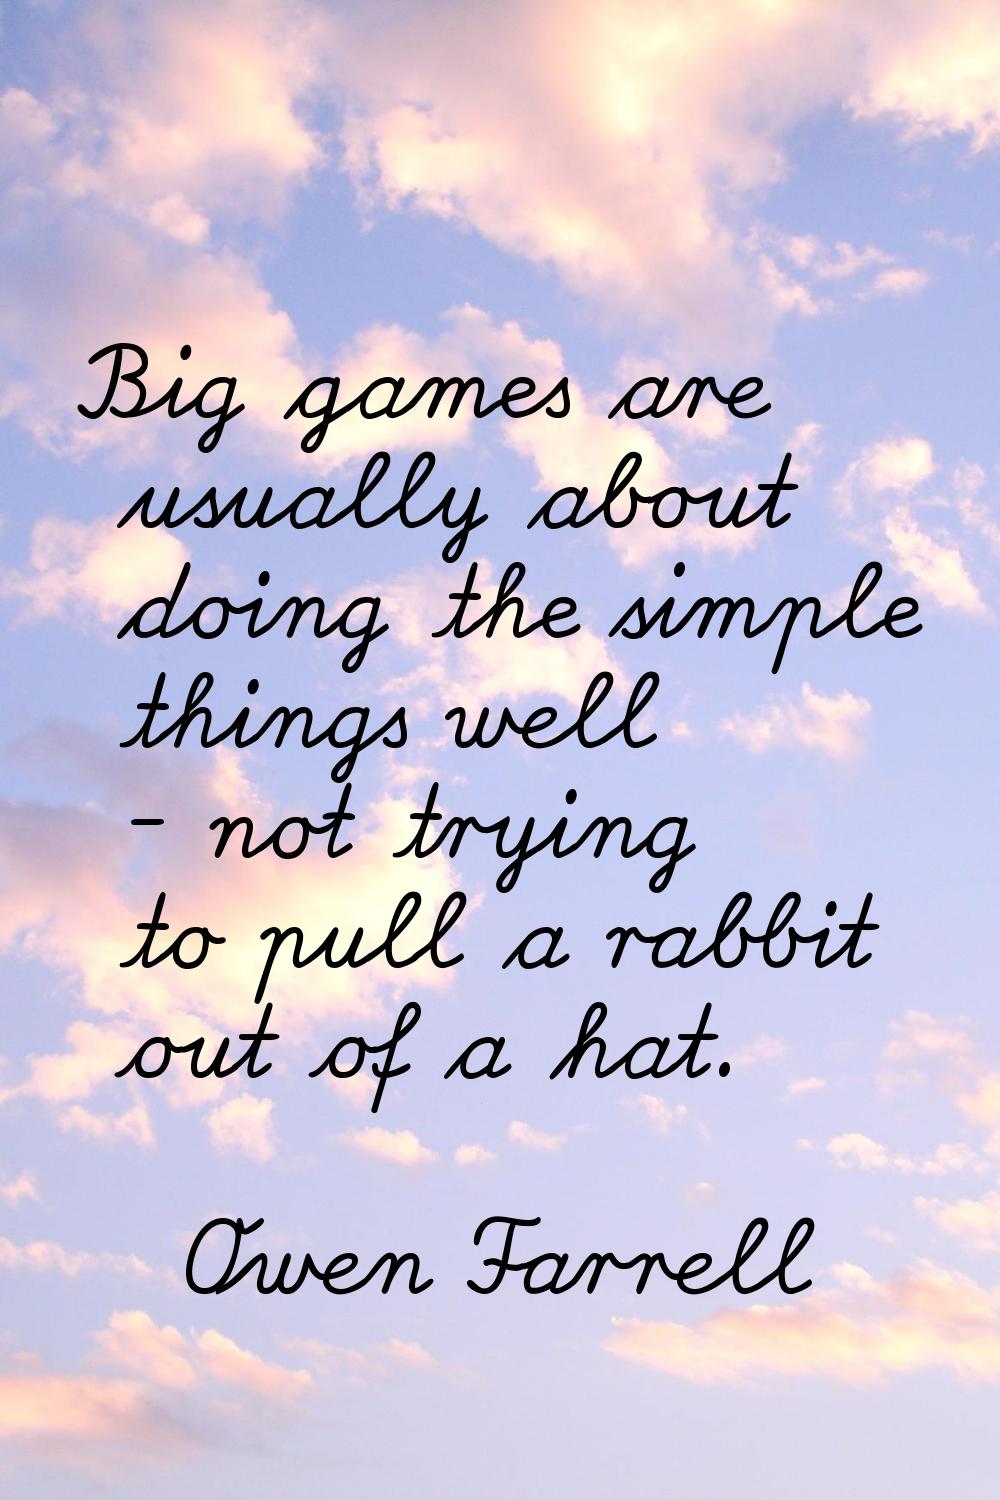 Big games are usually about doing the simple things well - not trying to pull a rabbit out of a hat